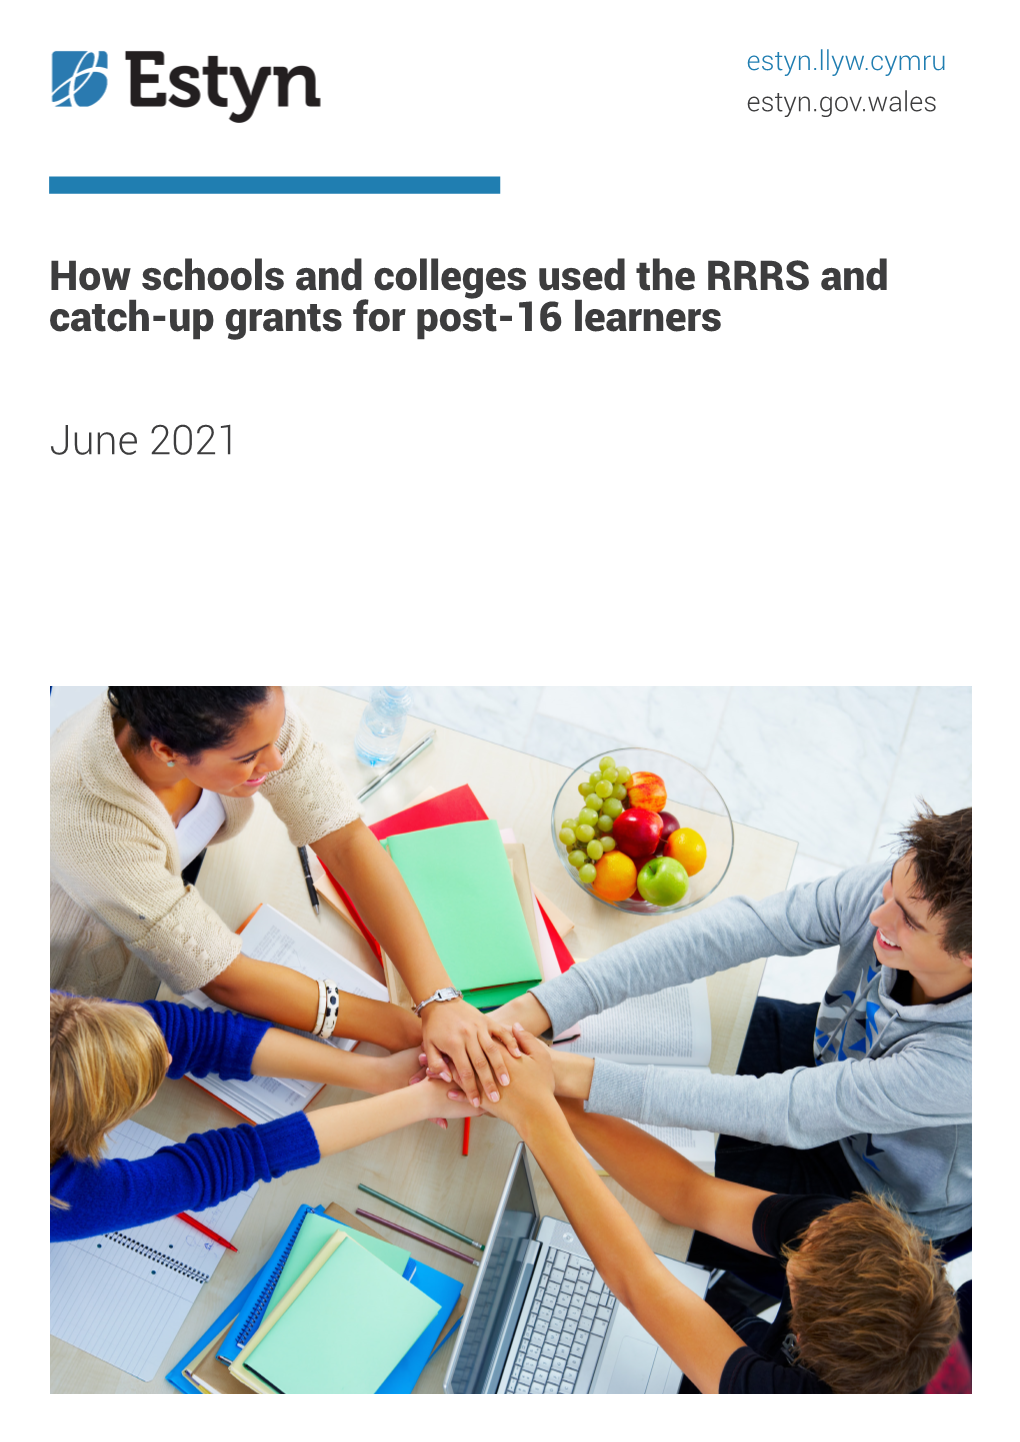 How Schools and Colleges Used the RRRS and Catch-Up Grants for Post-16 Learners